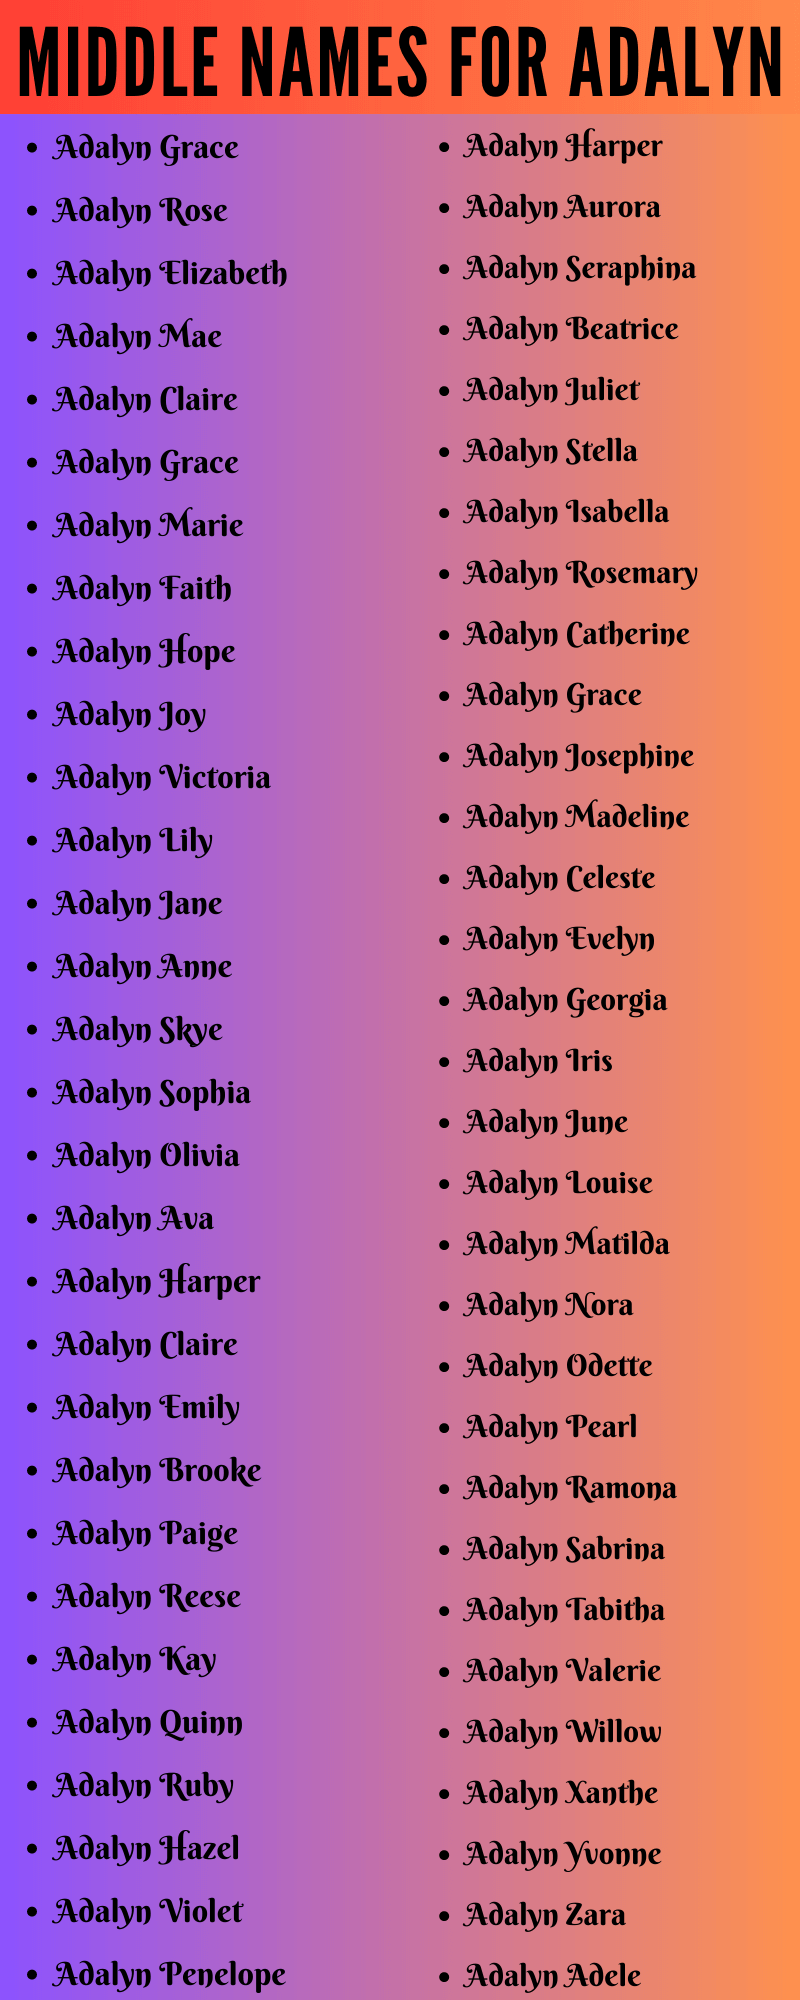 400 Amazing Middle Names For Adalyn That You Will Love